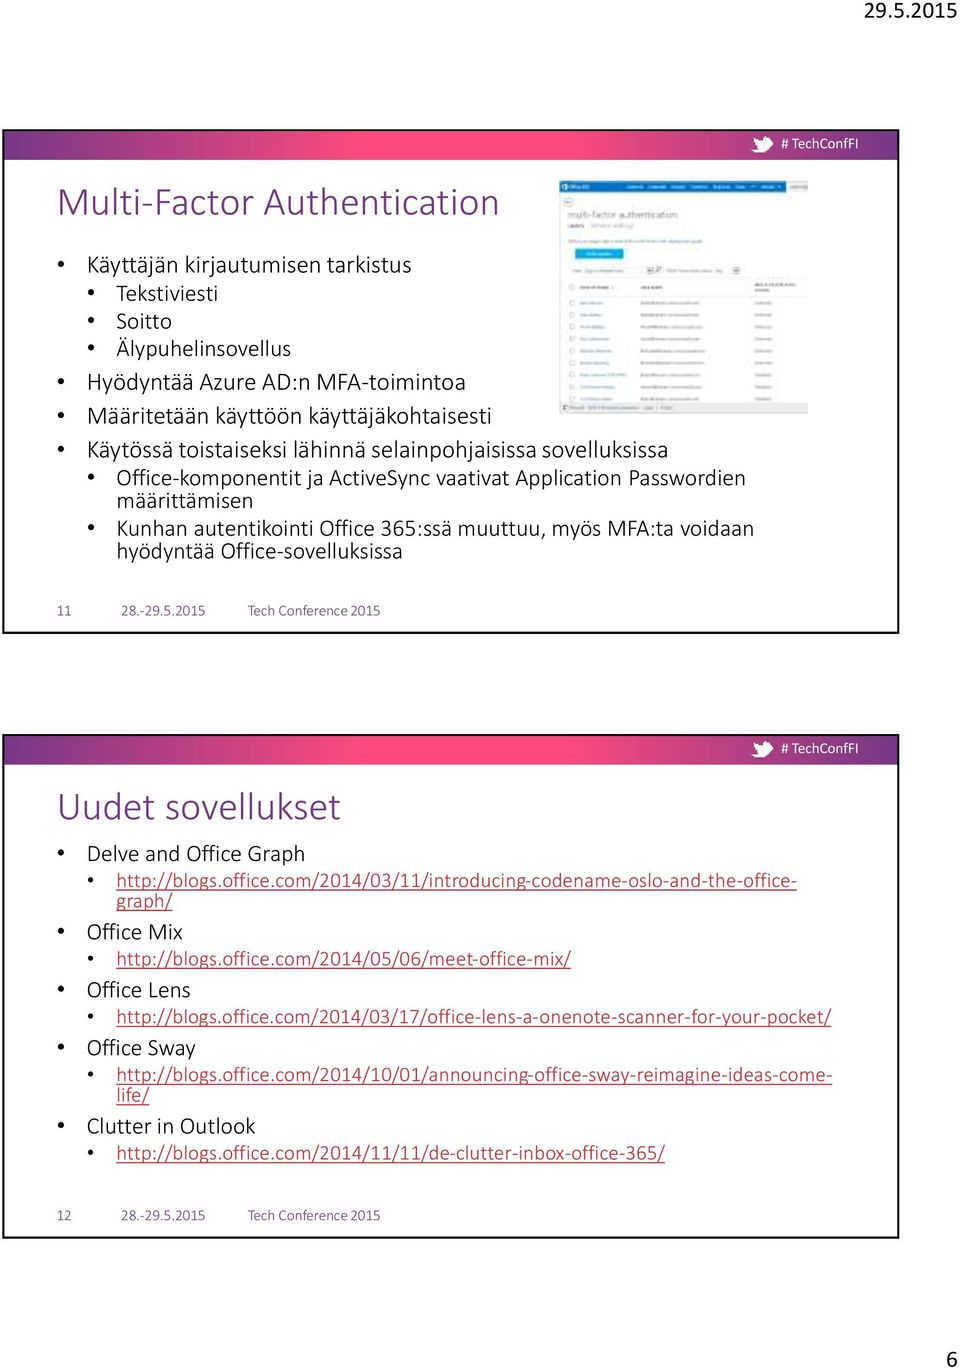 Office-sovelluksissa 11 Uudet sovellukset Delve and Office Graph http://blogs.office.com/2014/03/11/introducing-codename-oslo-and-the-officegraph/ Office Mix http://blogs.office.com/2014/05/06/meet-office-mix/ Office Lens http://blogs.